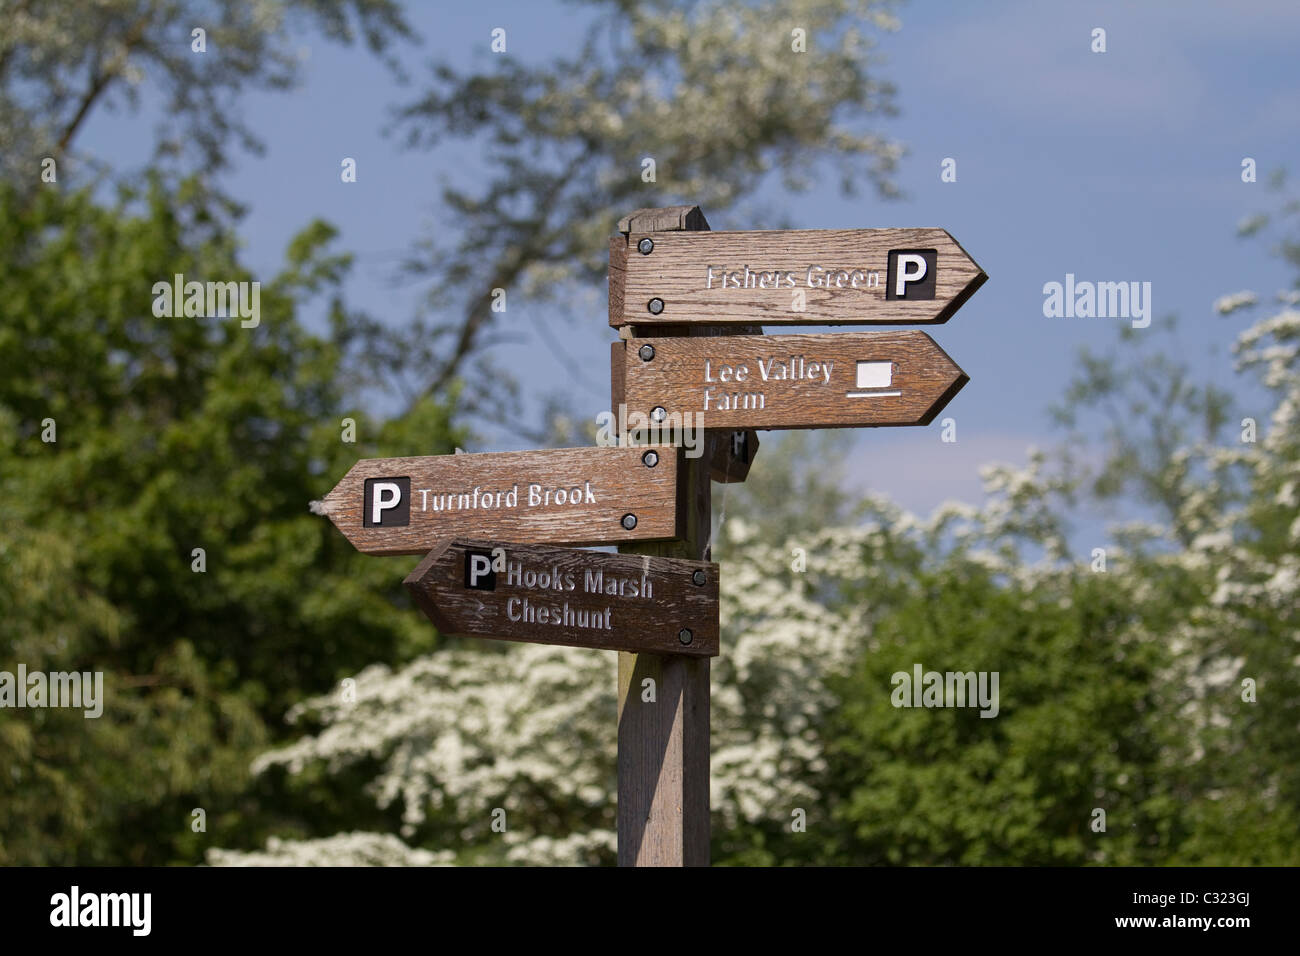 Direction sign posts fishers green lea valley Essex Stock Photo